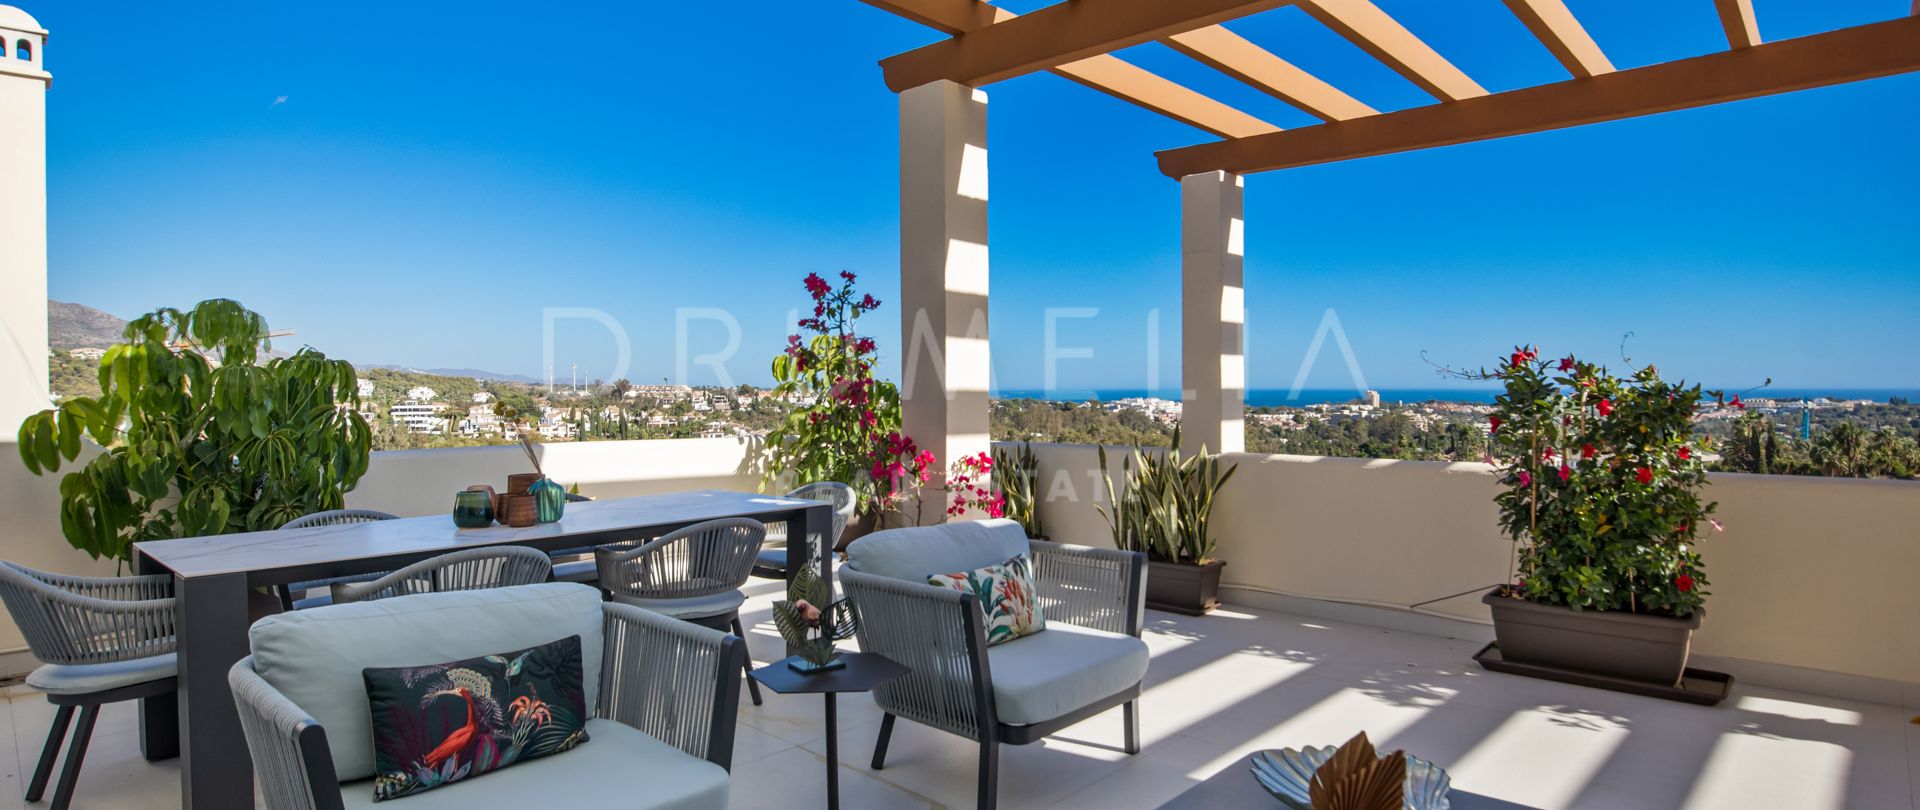 Renovated modern luxury duplex penthouse with amazing open sea and mountain views in Los Belvederes, Nueva Andalucía, Marbella